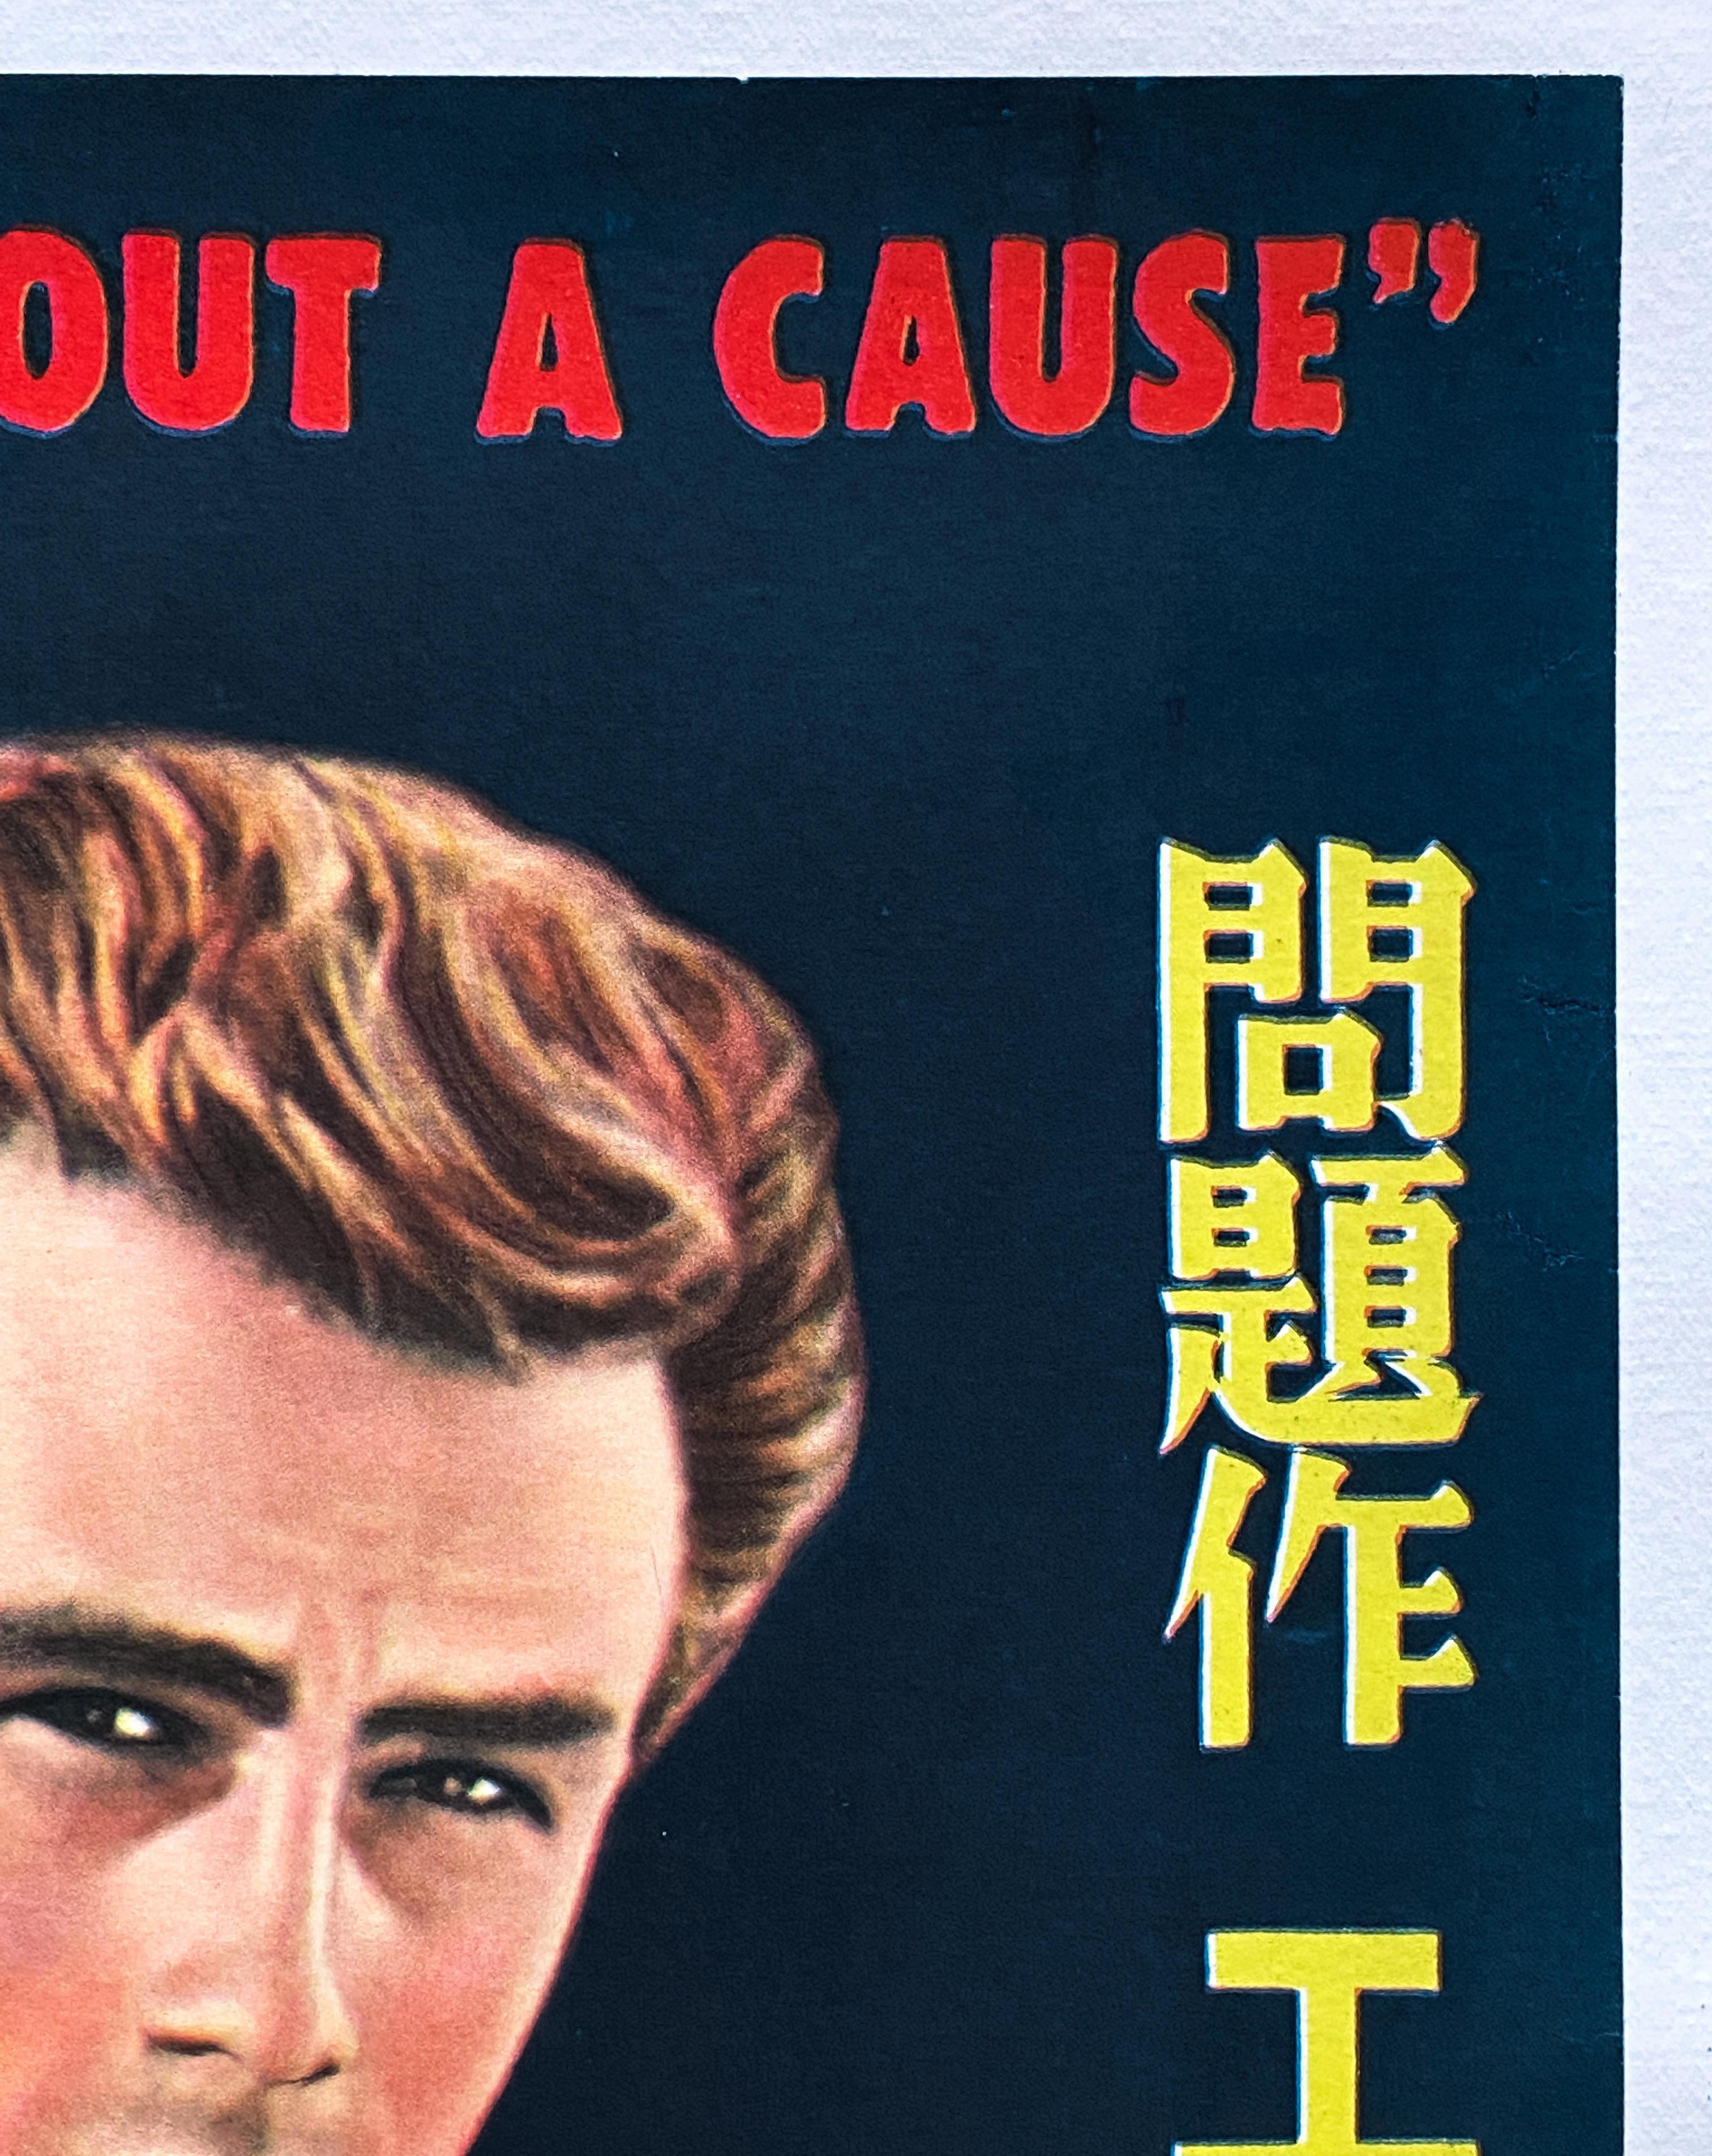 James Dean 'Rebel Without A Cause' Original Vintage Movie Poster, Japanese, 1956 For Sale 2